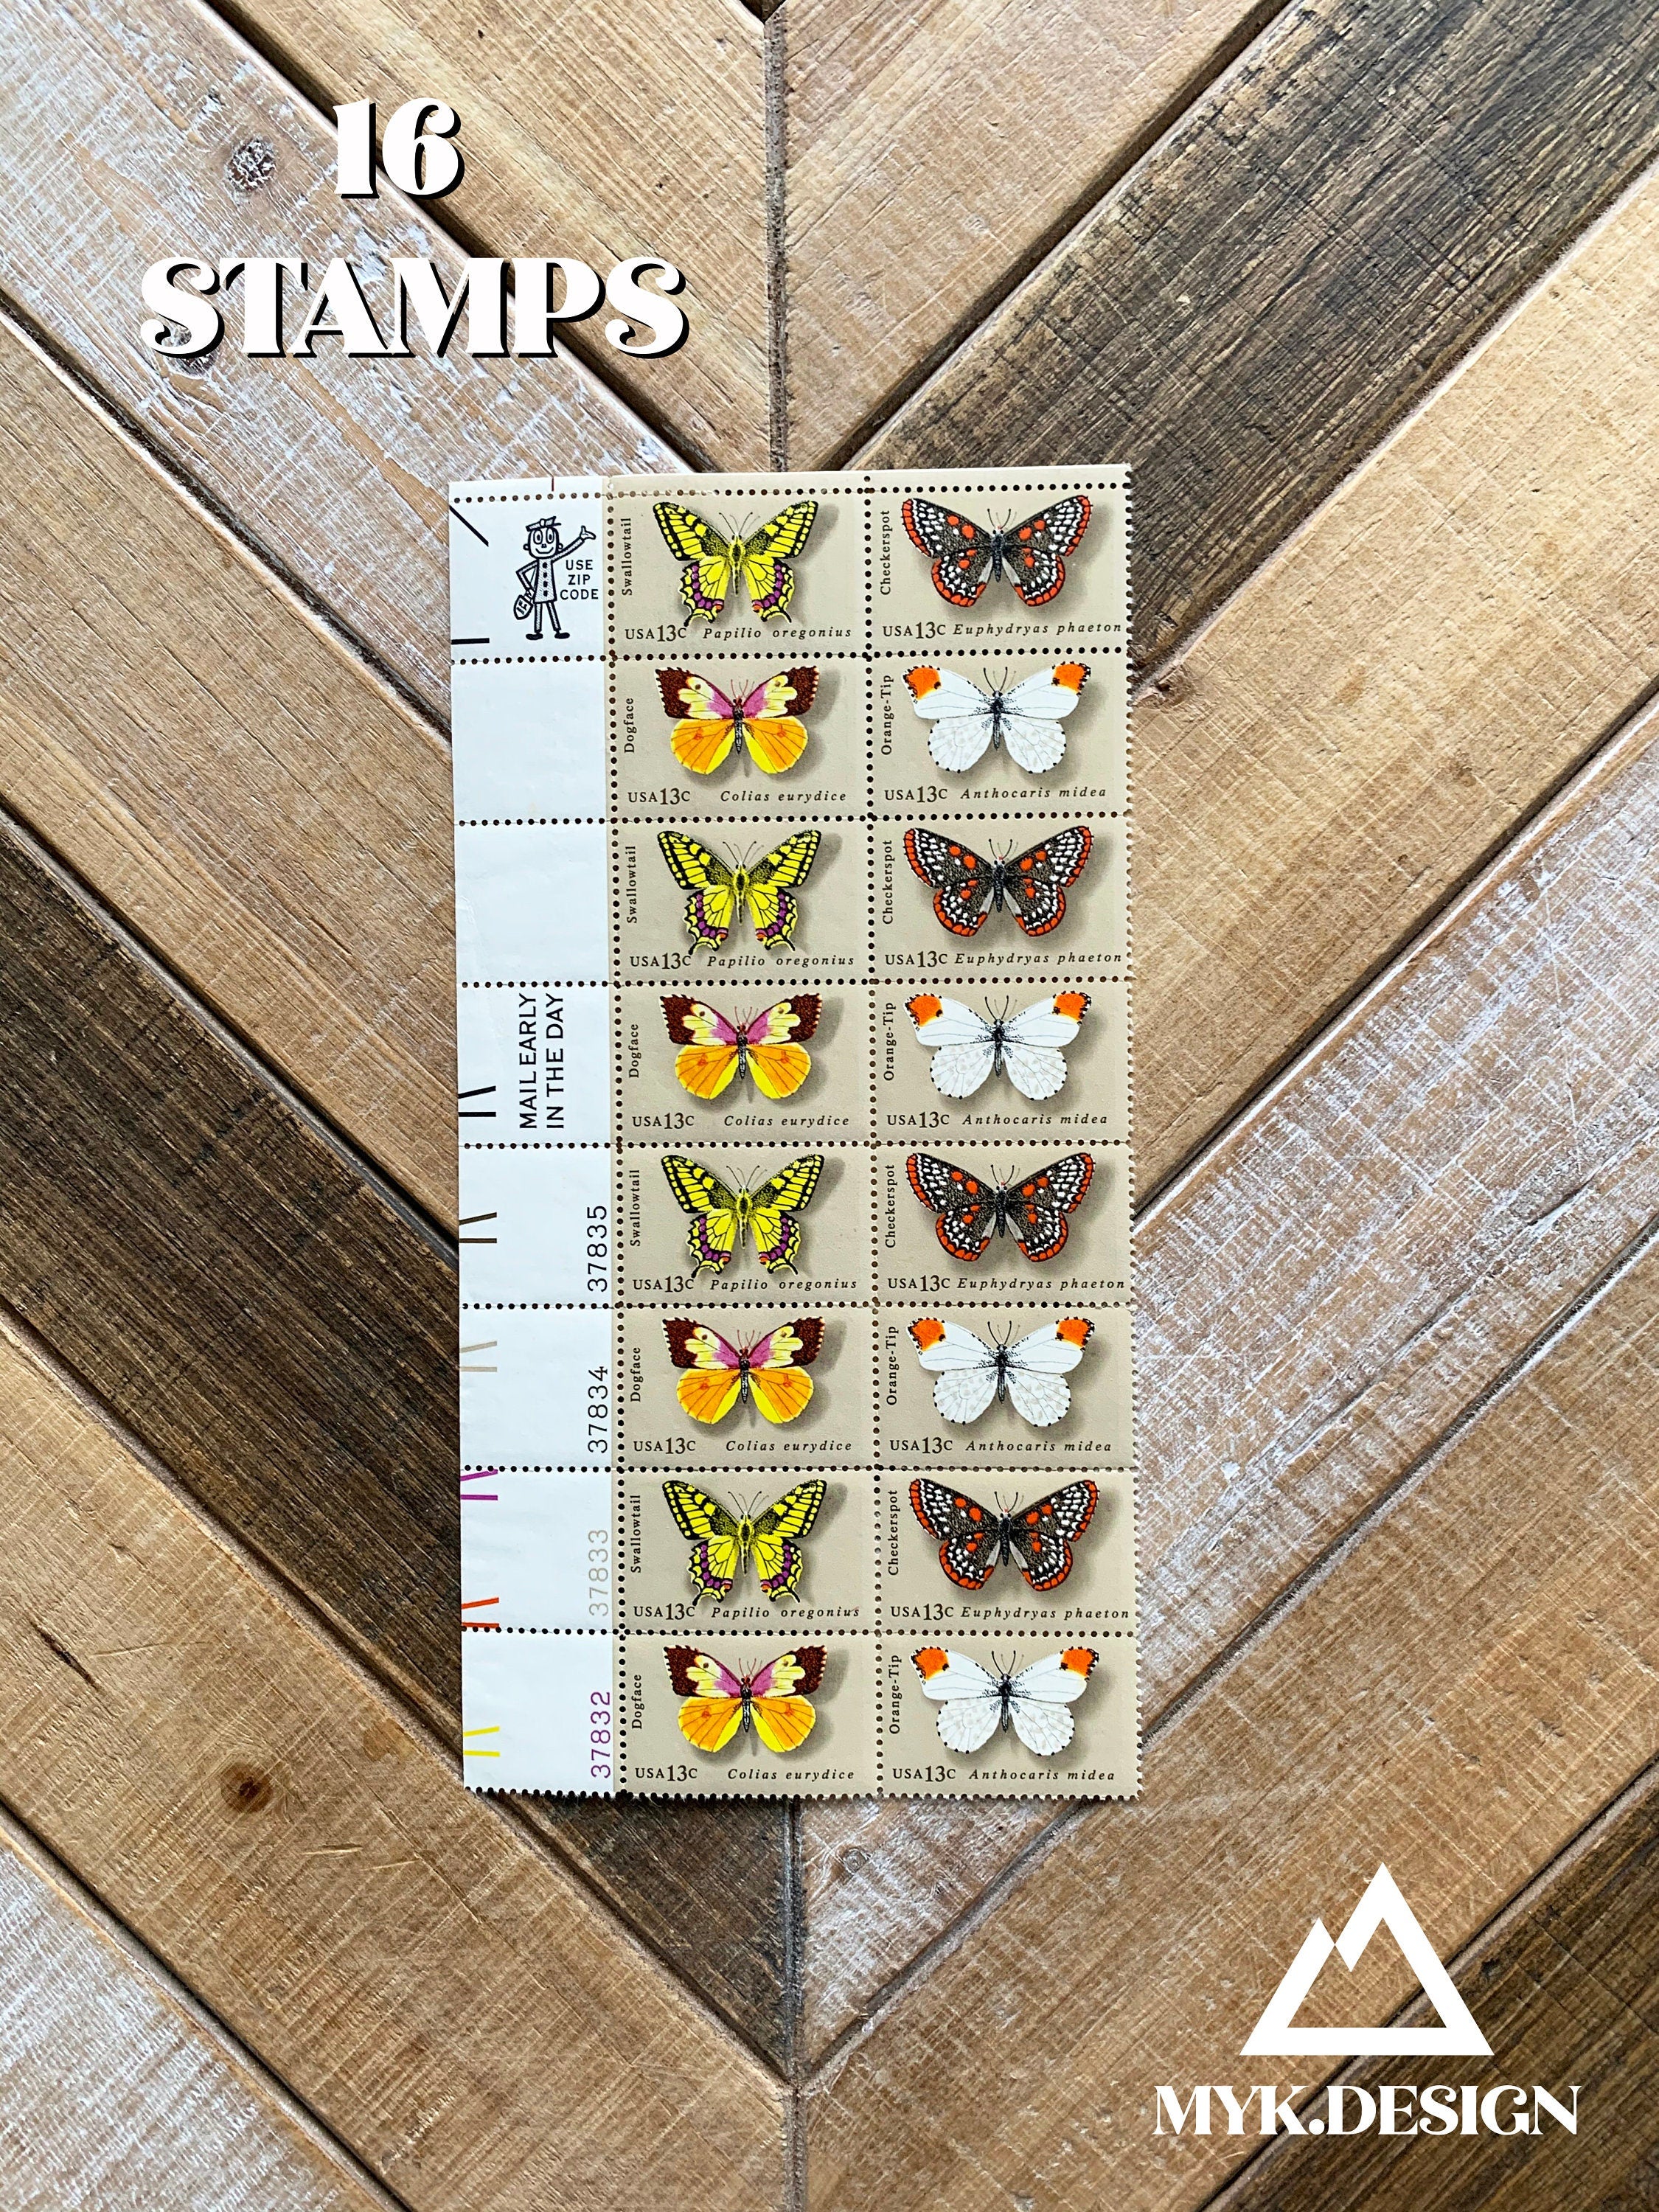 Butterfly Stamp Sheet, 50 Stamps, 13 Cent US Postage Stamps, 1977, Dogface,  Swallowtail, Orange-tip, Checkerspot 